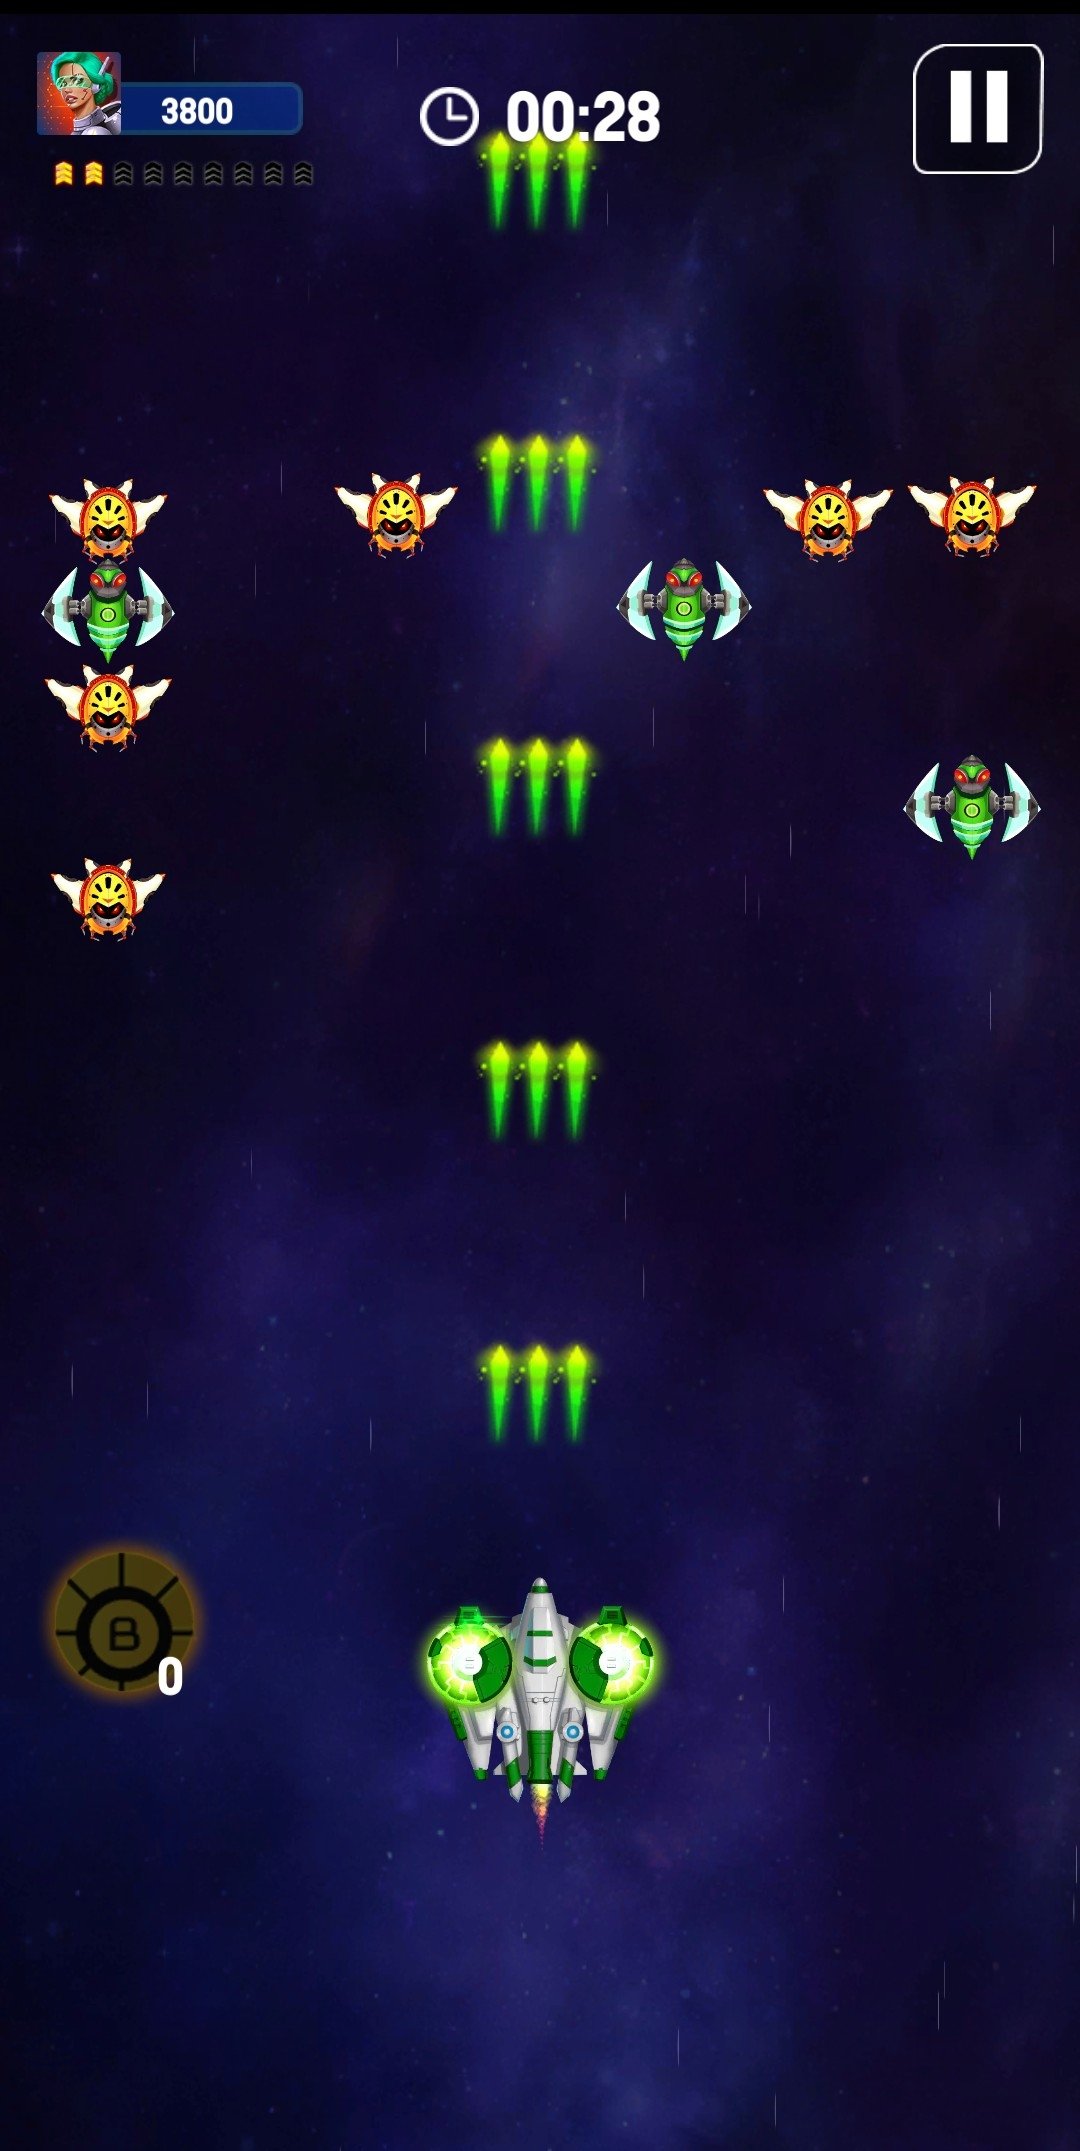 free download space shooter game for pc